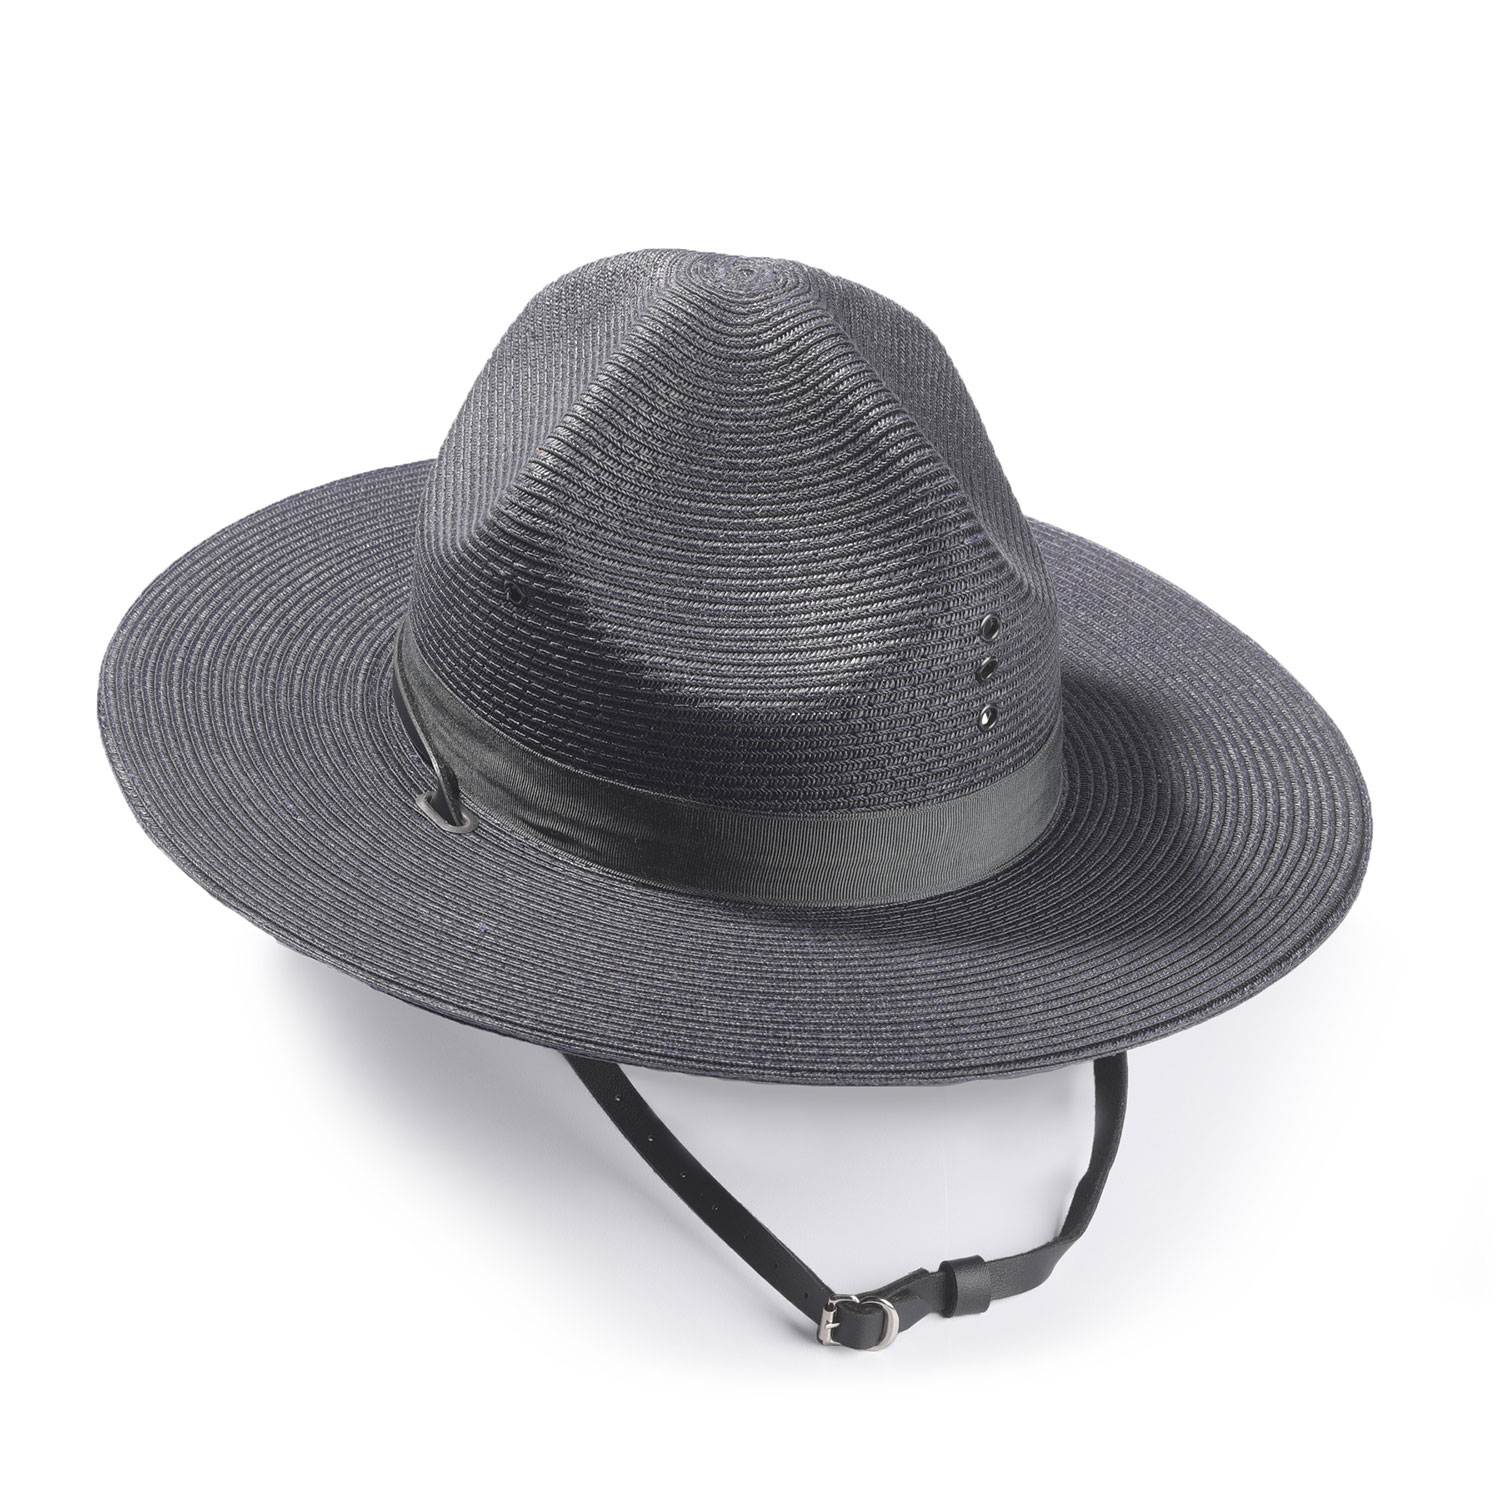 Triple Brim Straw Campaign Hat with Two Eyelets